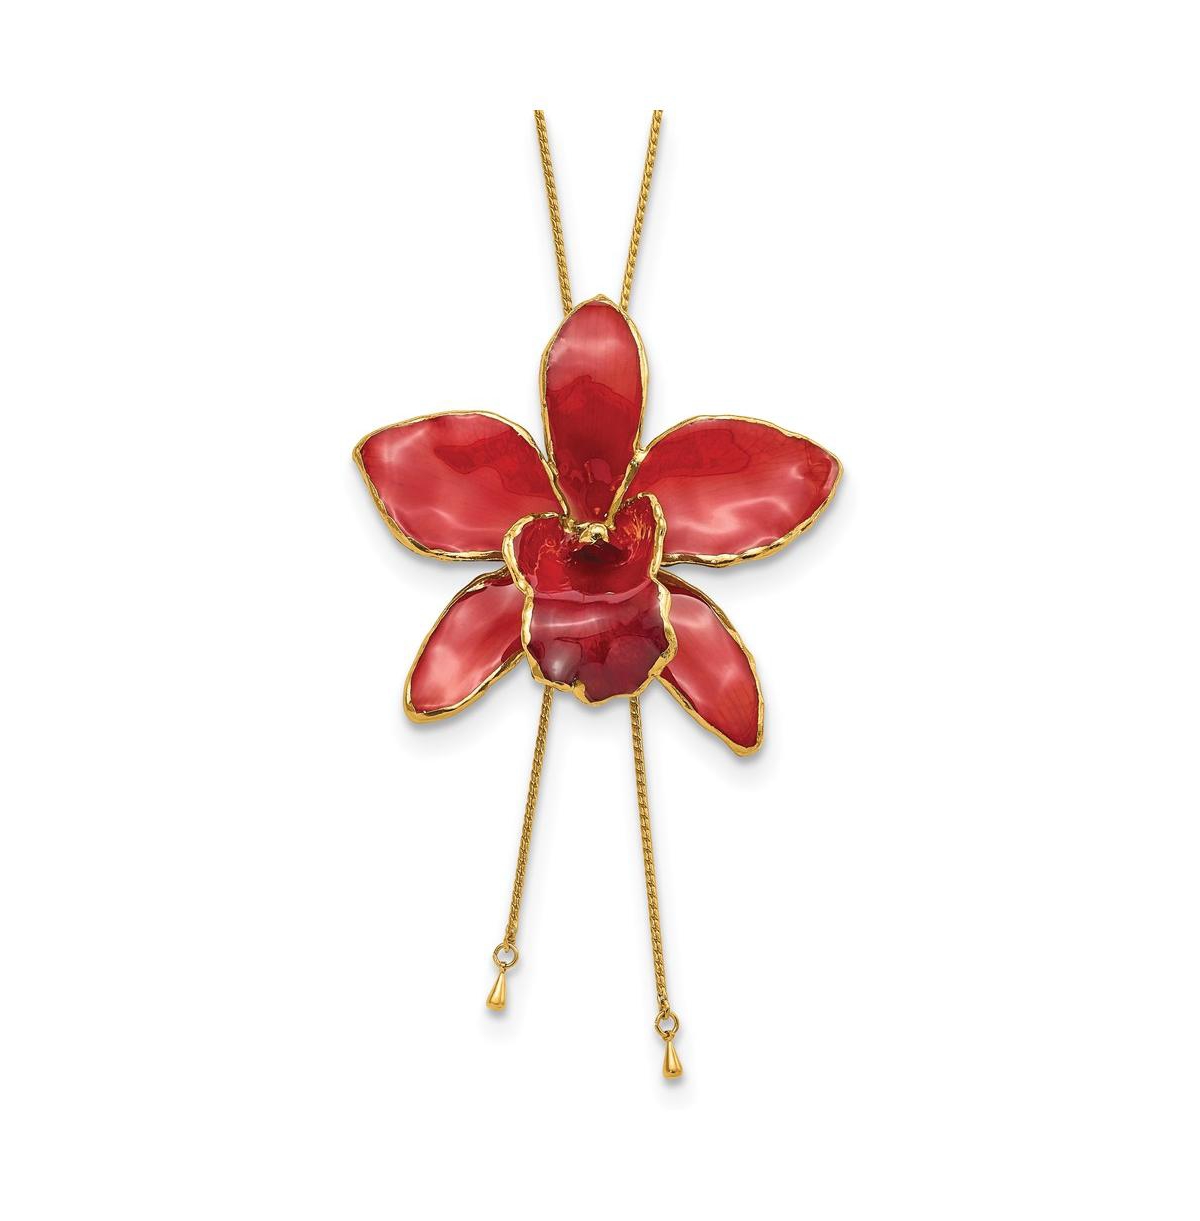 24K Gold-trim Lacquer Dipped Red Cattleya Orchid Adjustable Necklace - Open Miscellaneous